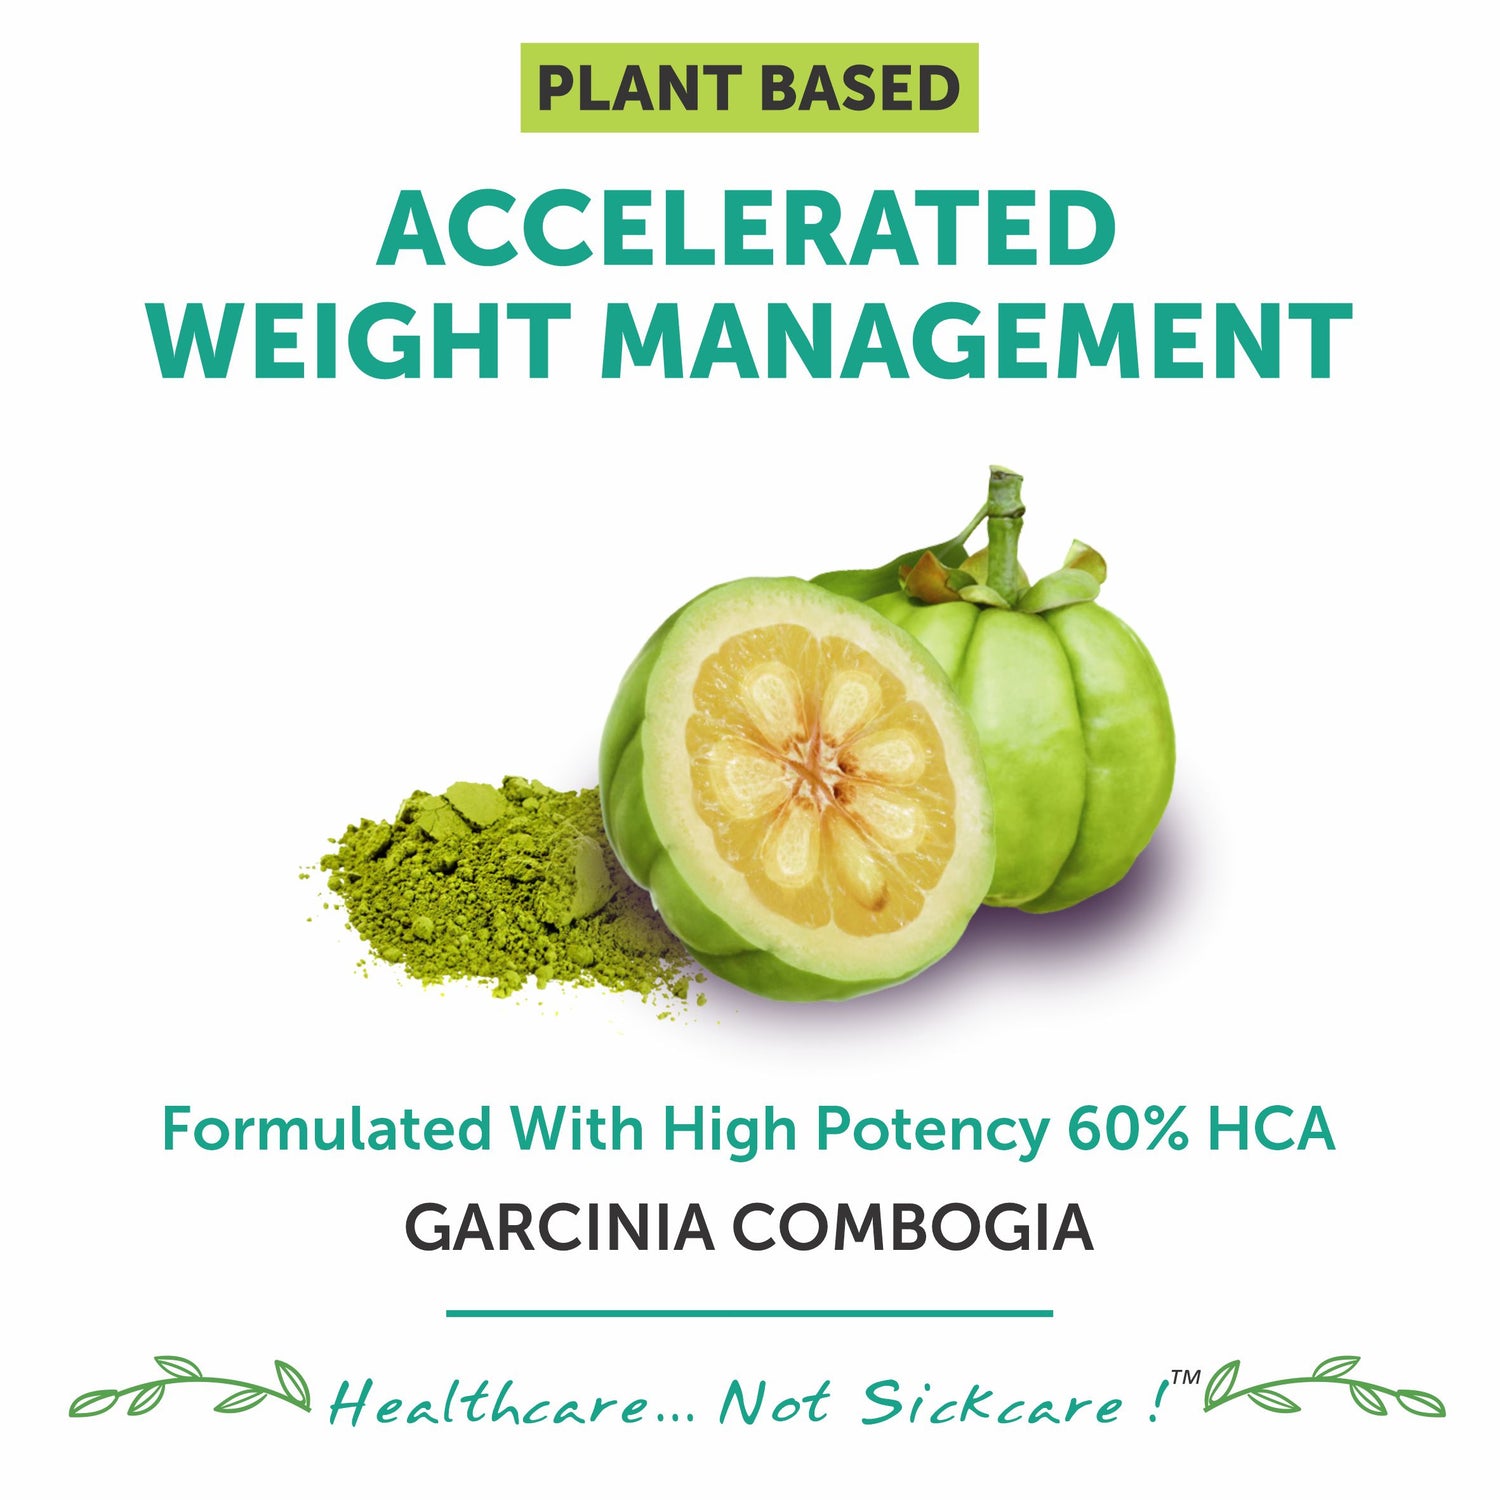 garcinia combogia weight loss fat burner men women metabolism boost appetite control muscle build female capsule tablet cutter burn belly reduction gym